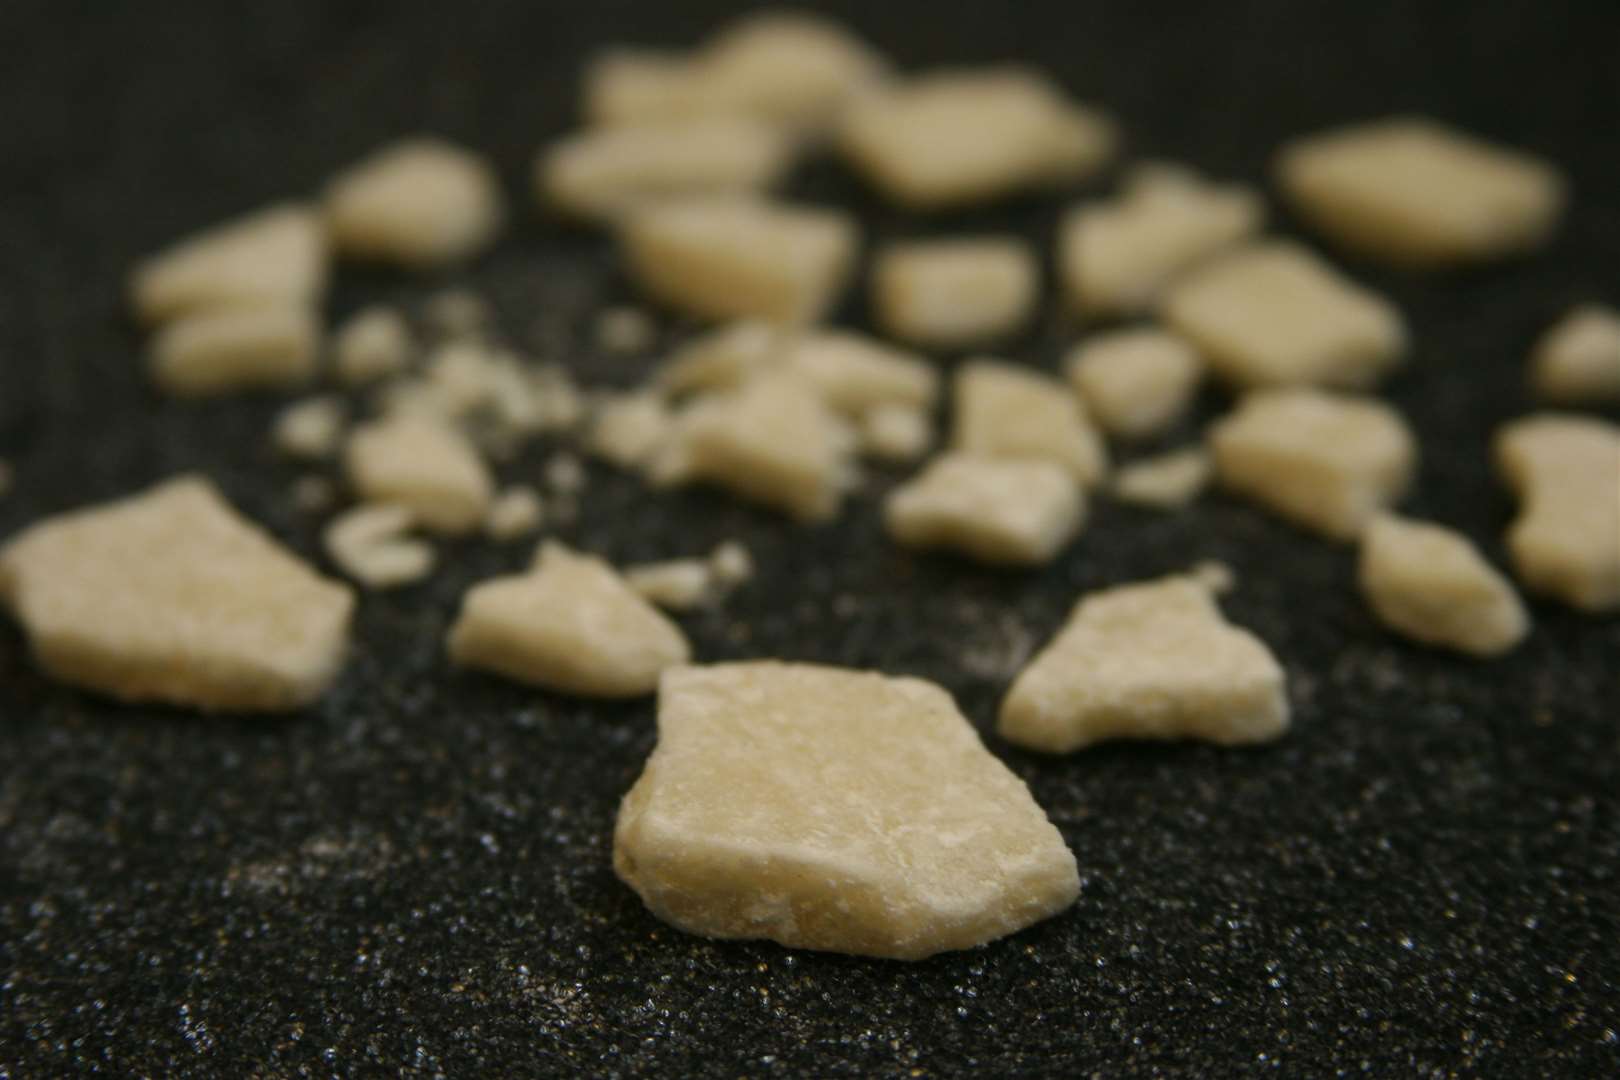 Stock picture of some crack cocaine. Picture: John Westhrop